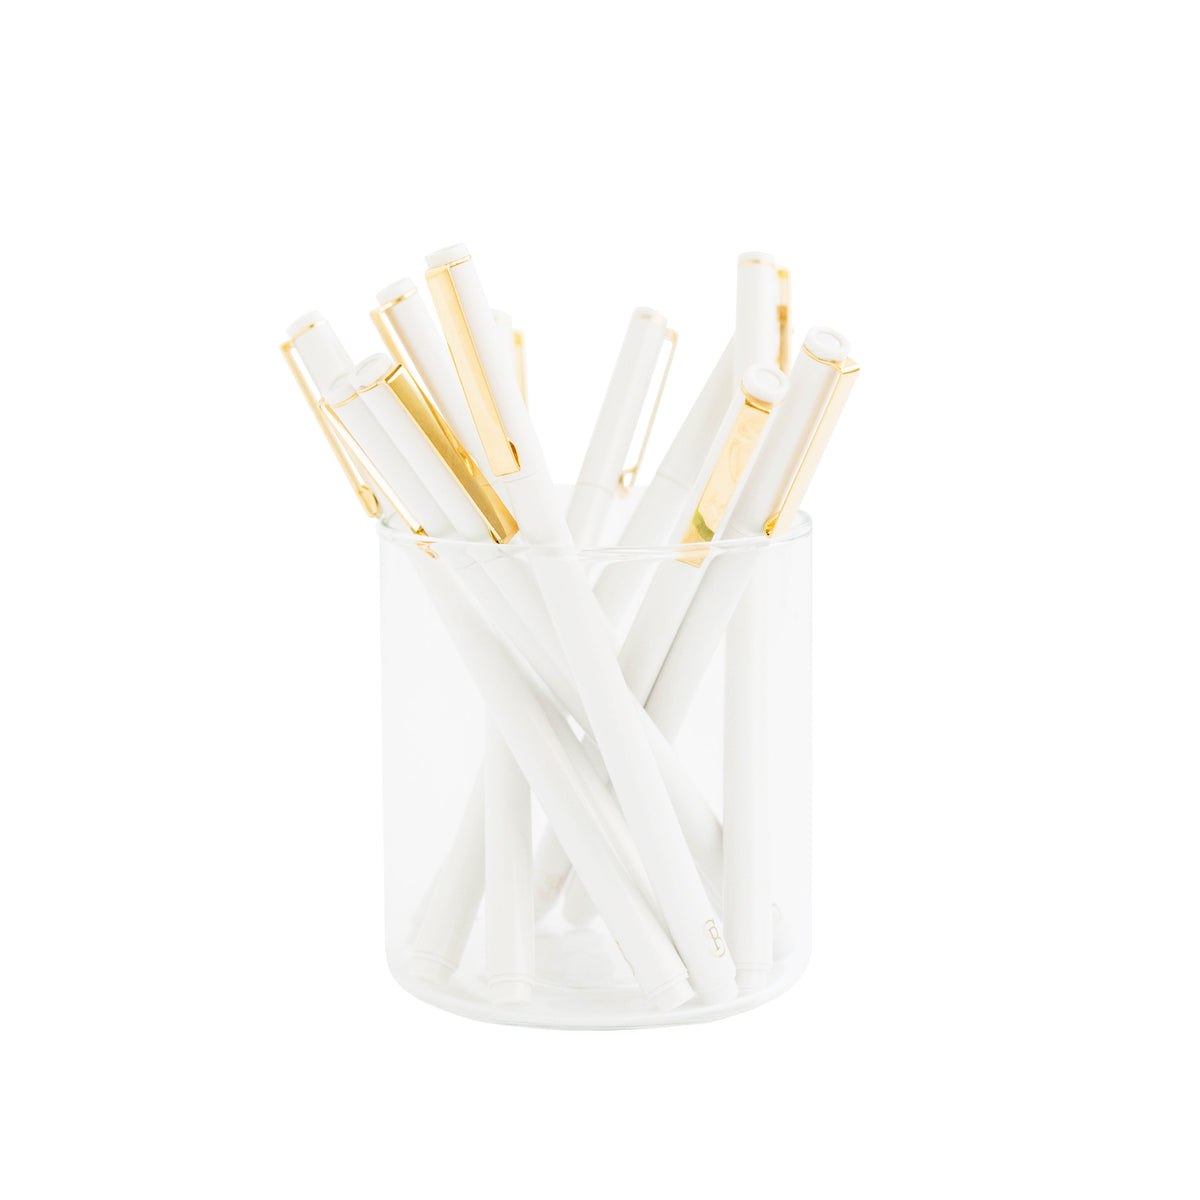 White and Gold Felt Tip Pens in Glass Jar